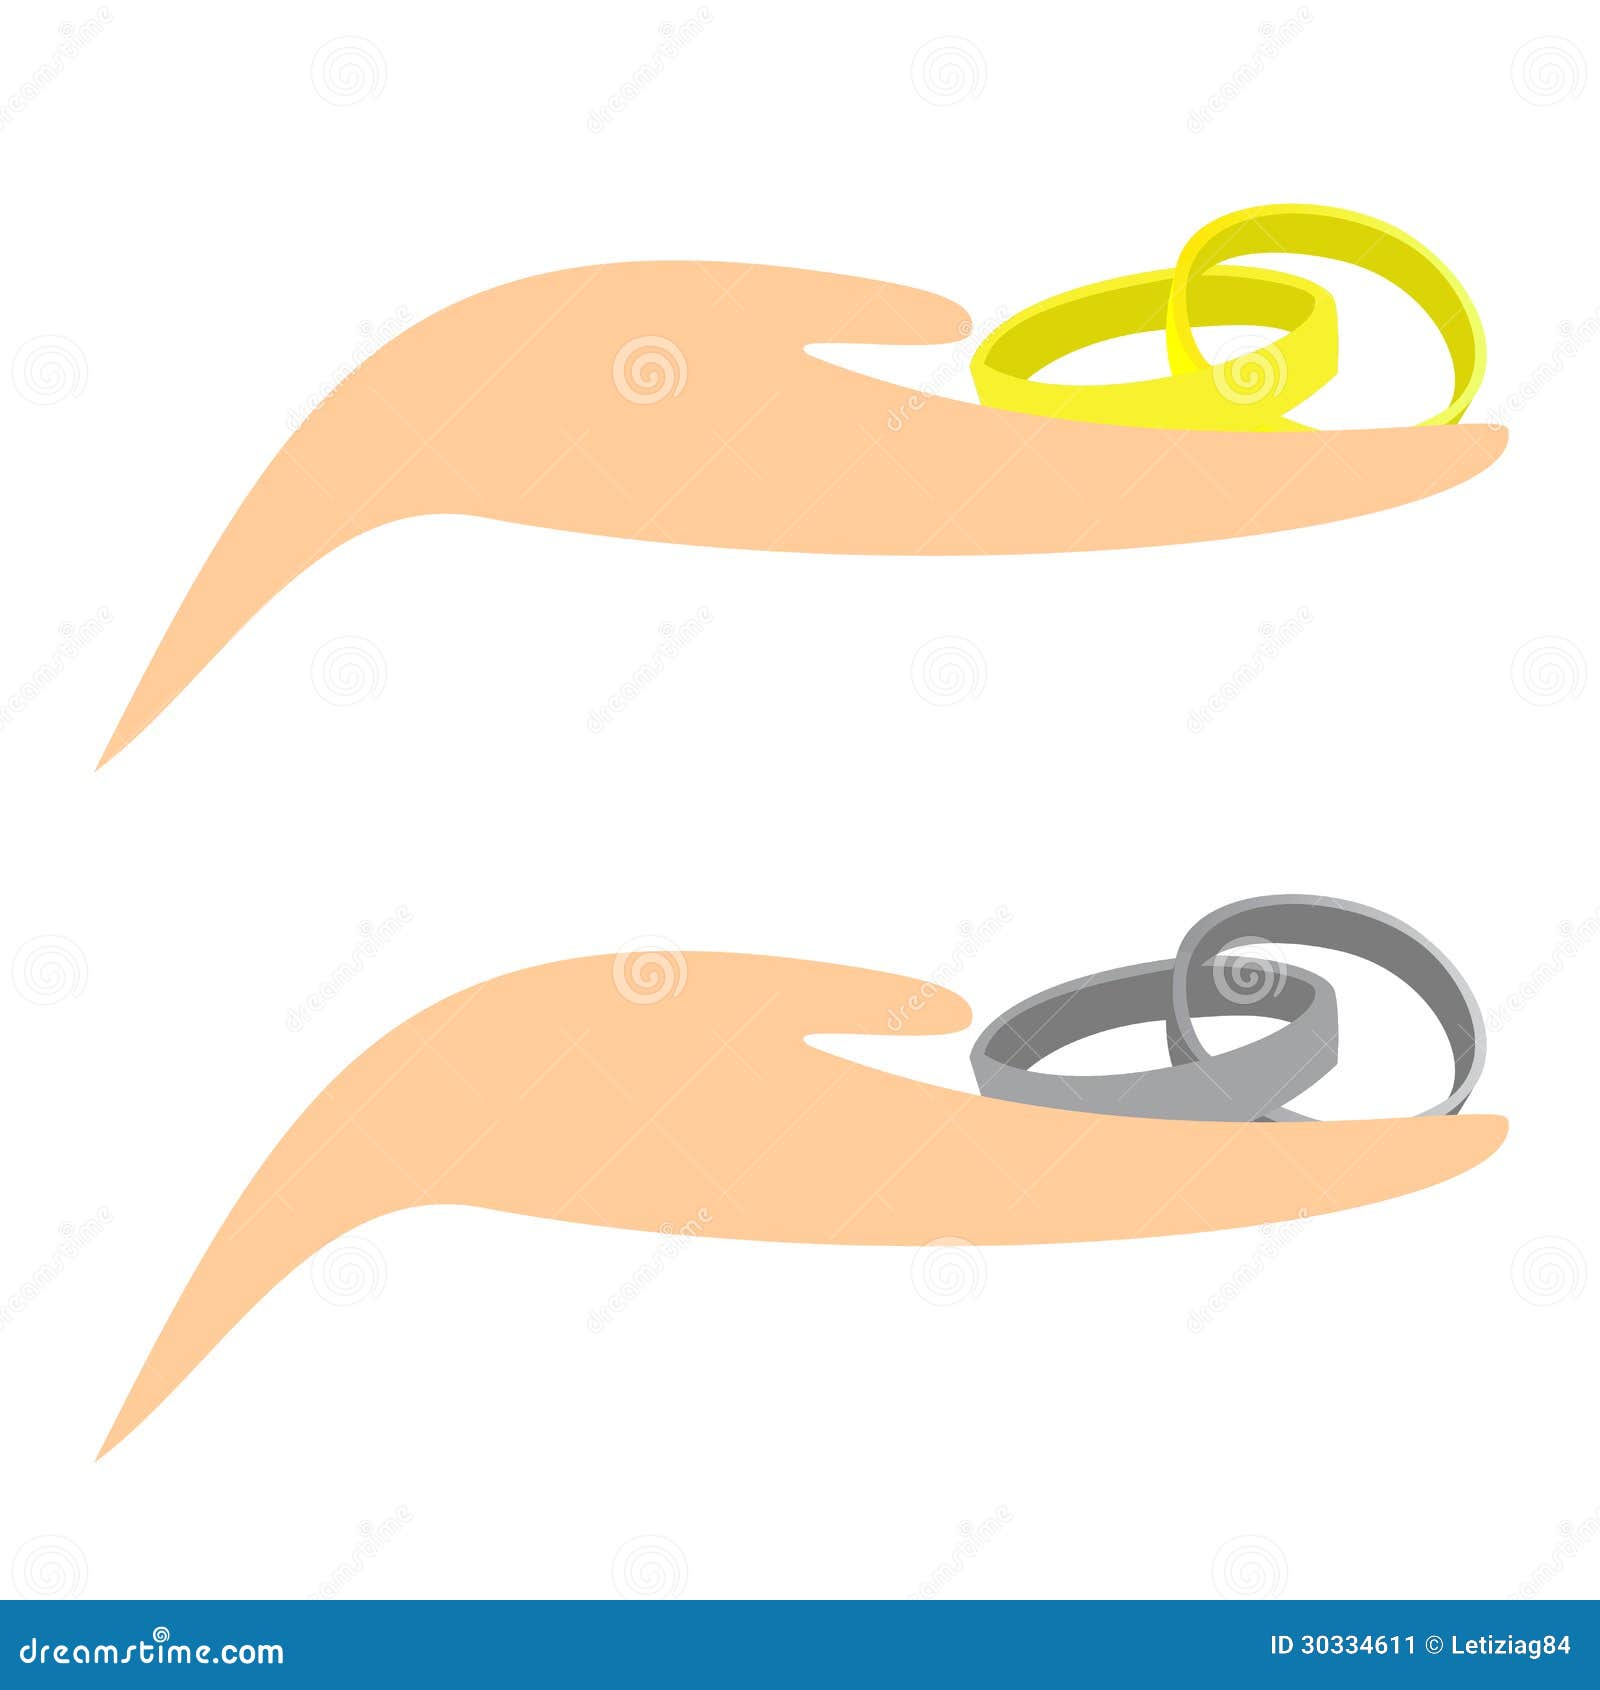 Illustration - Hand with wedding rings.